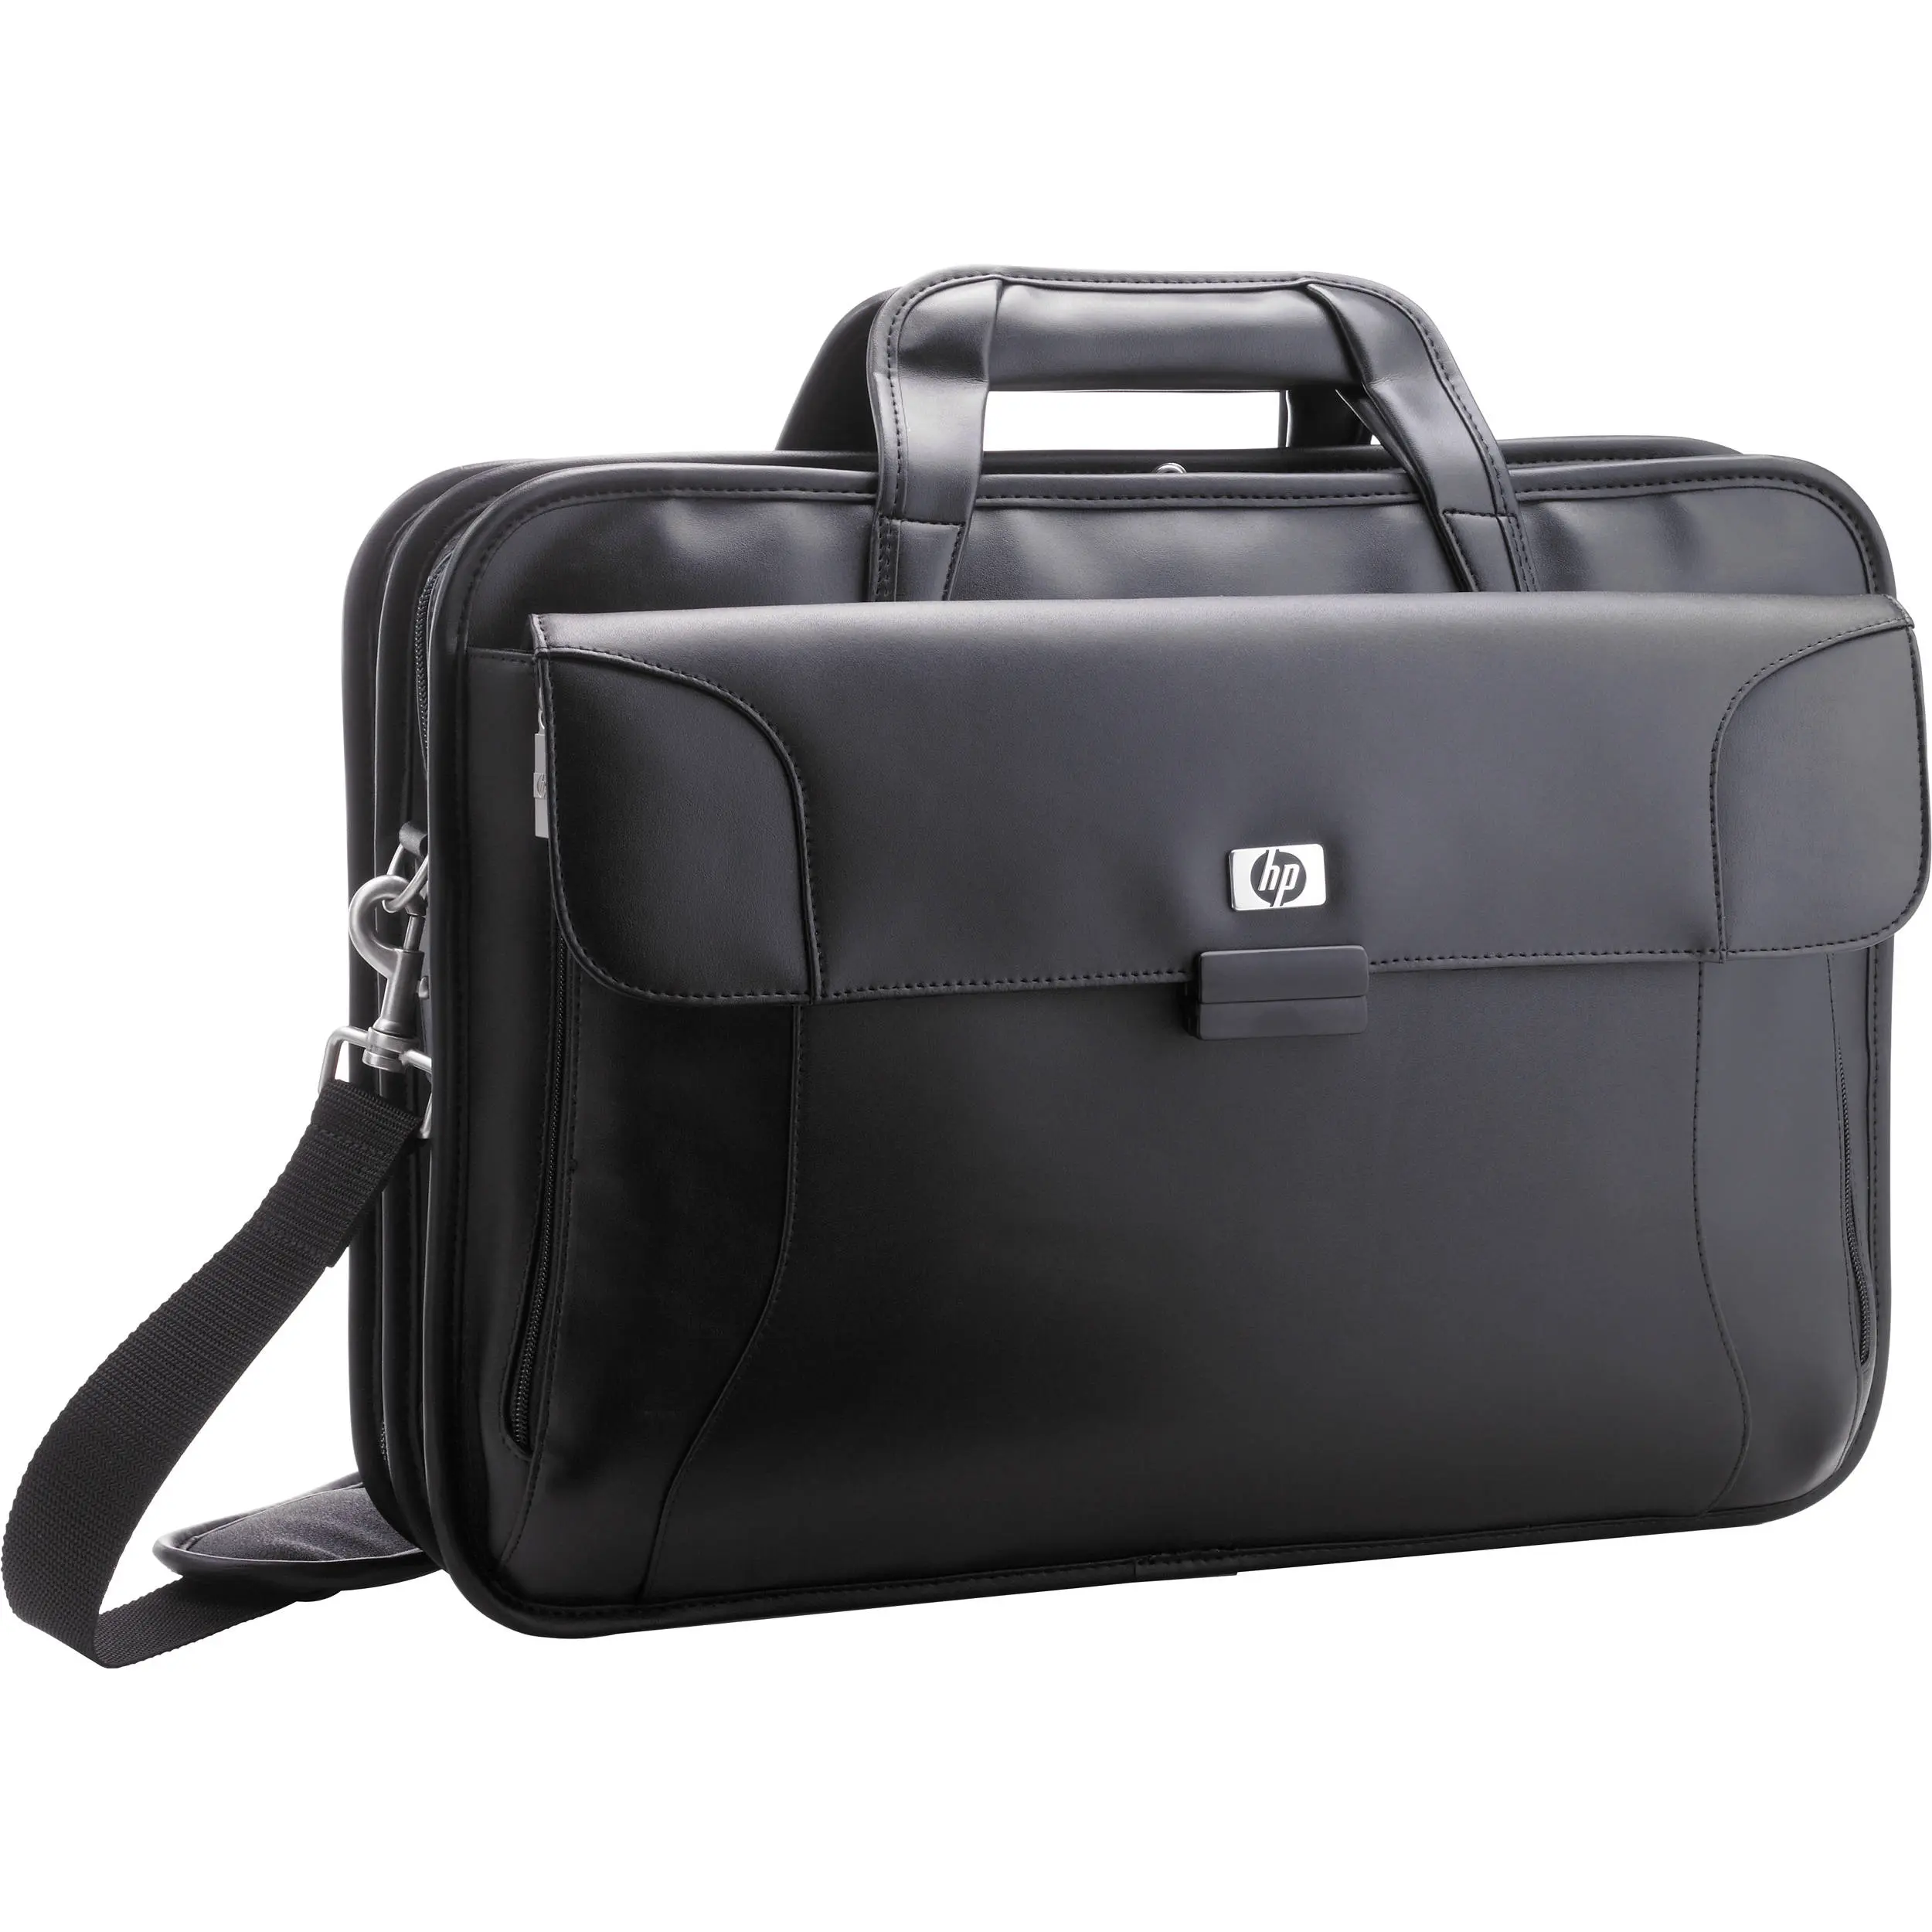 Hewlett-packard executive leather case: style & functionality